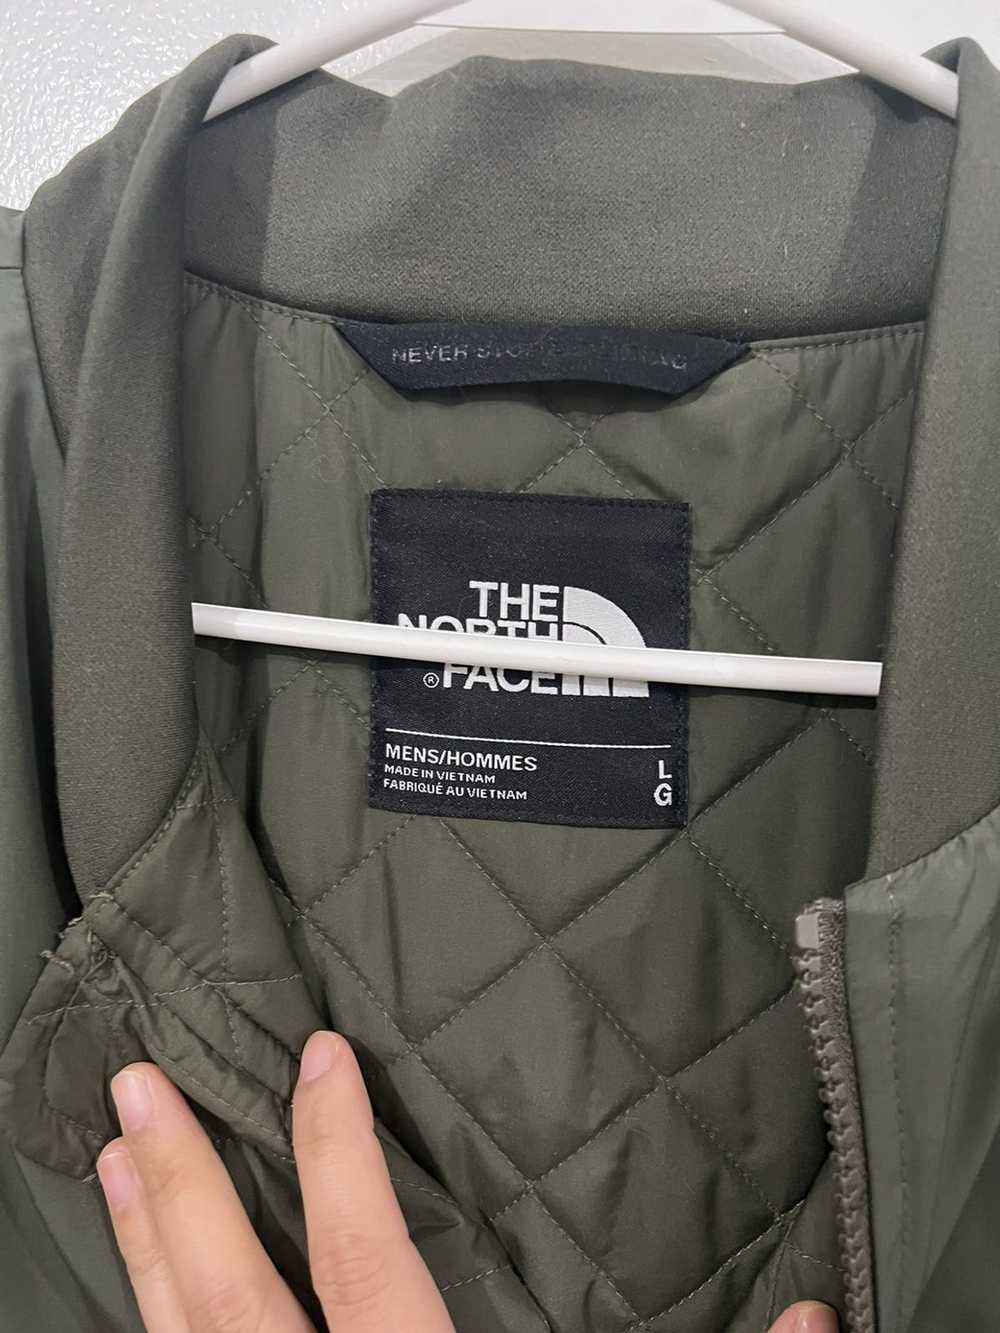 The North Face The North Face Jacket with patches - image 3